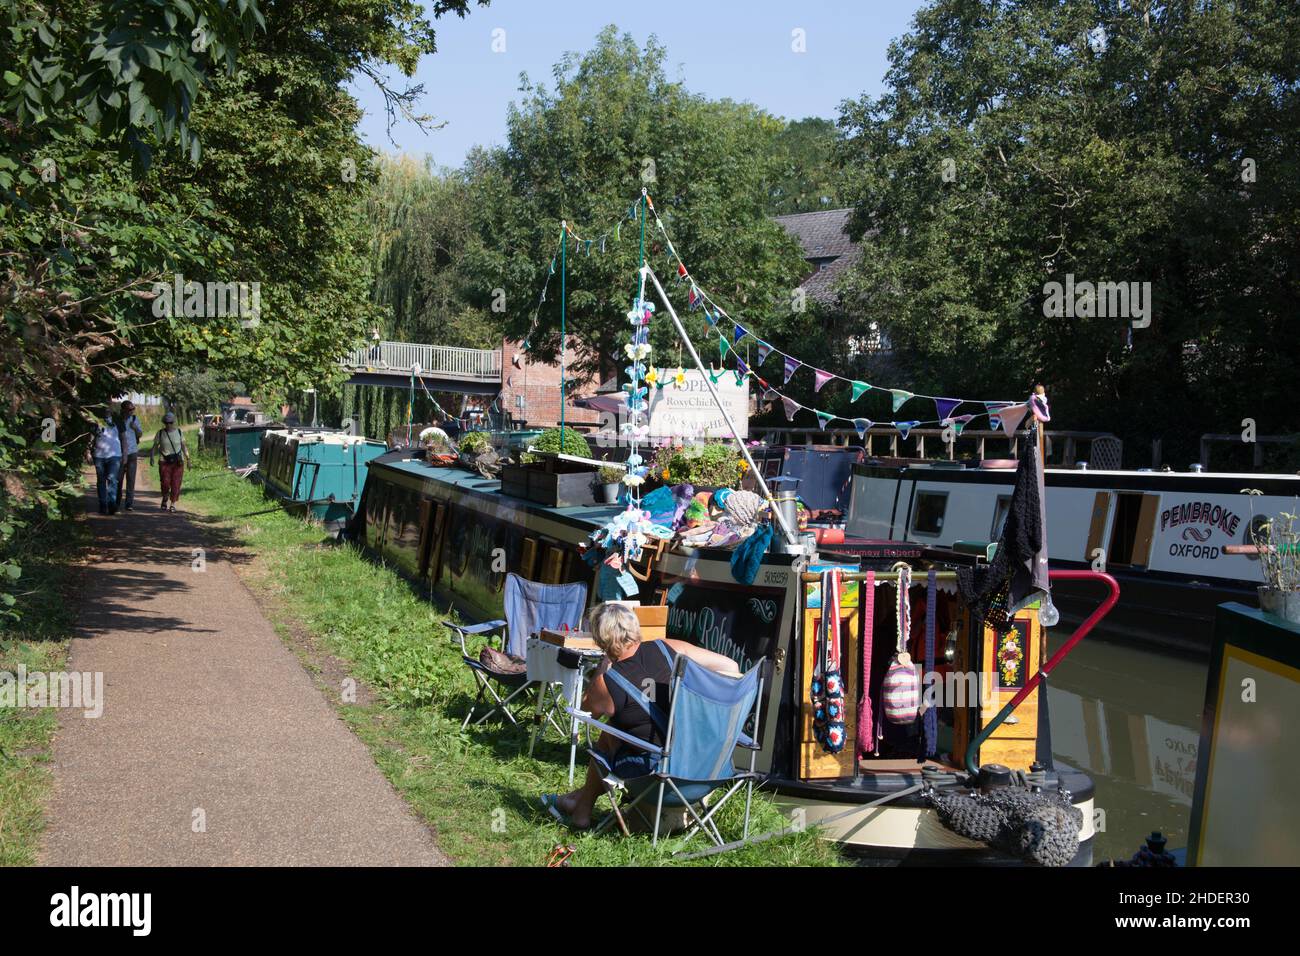 Views along the Oxford Canal path on a summer day in the UK Stock Photo